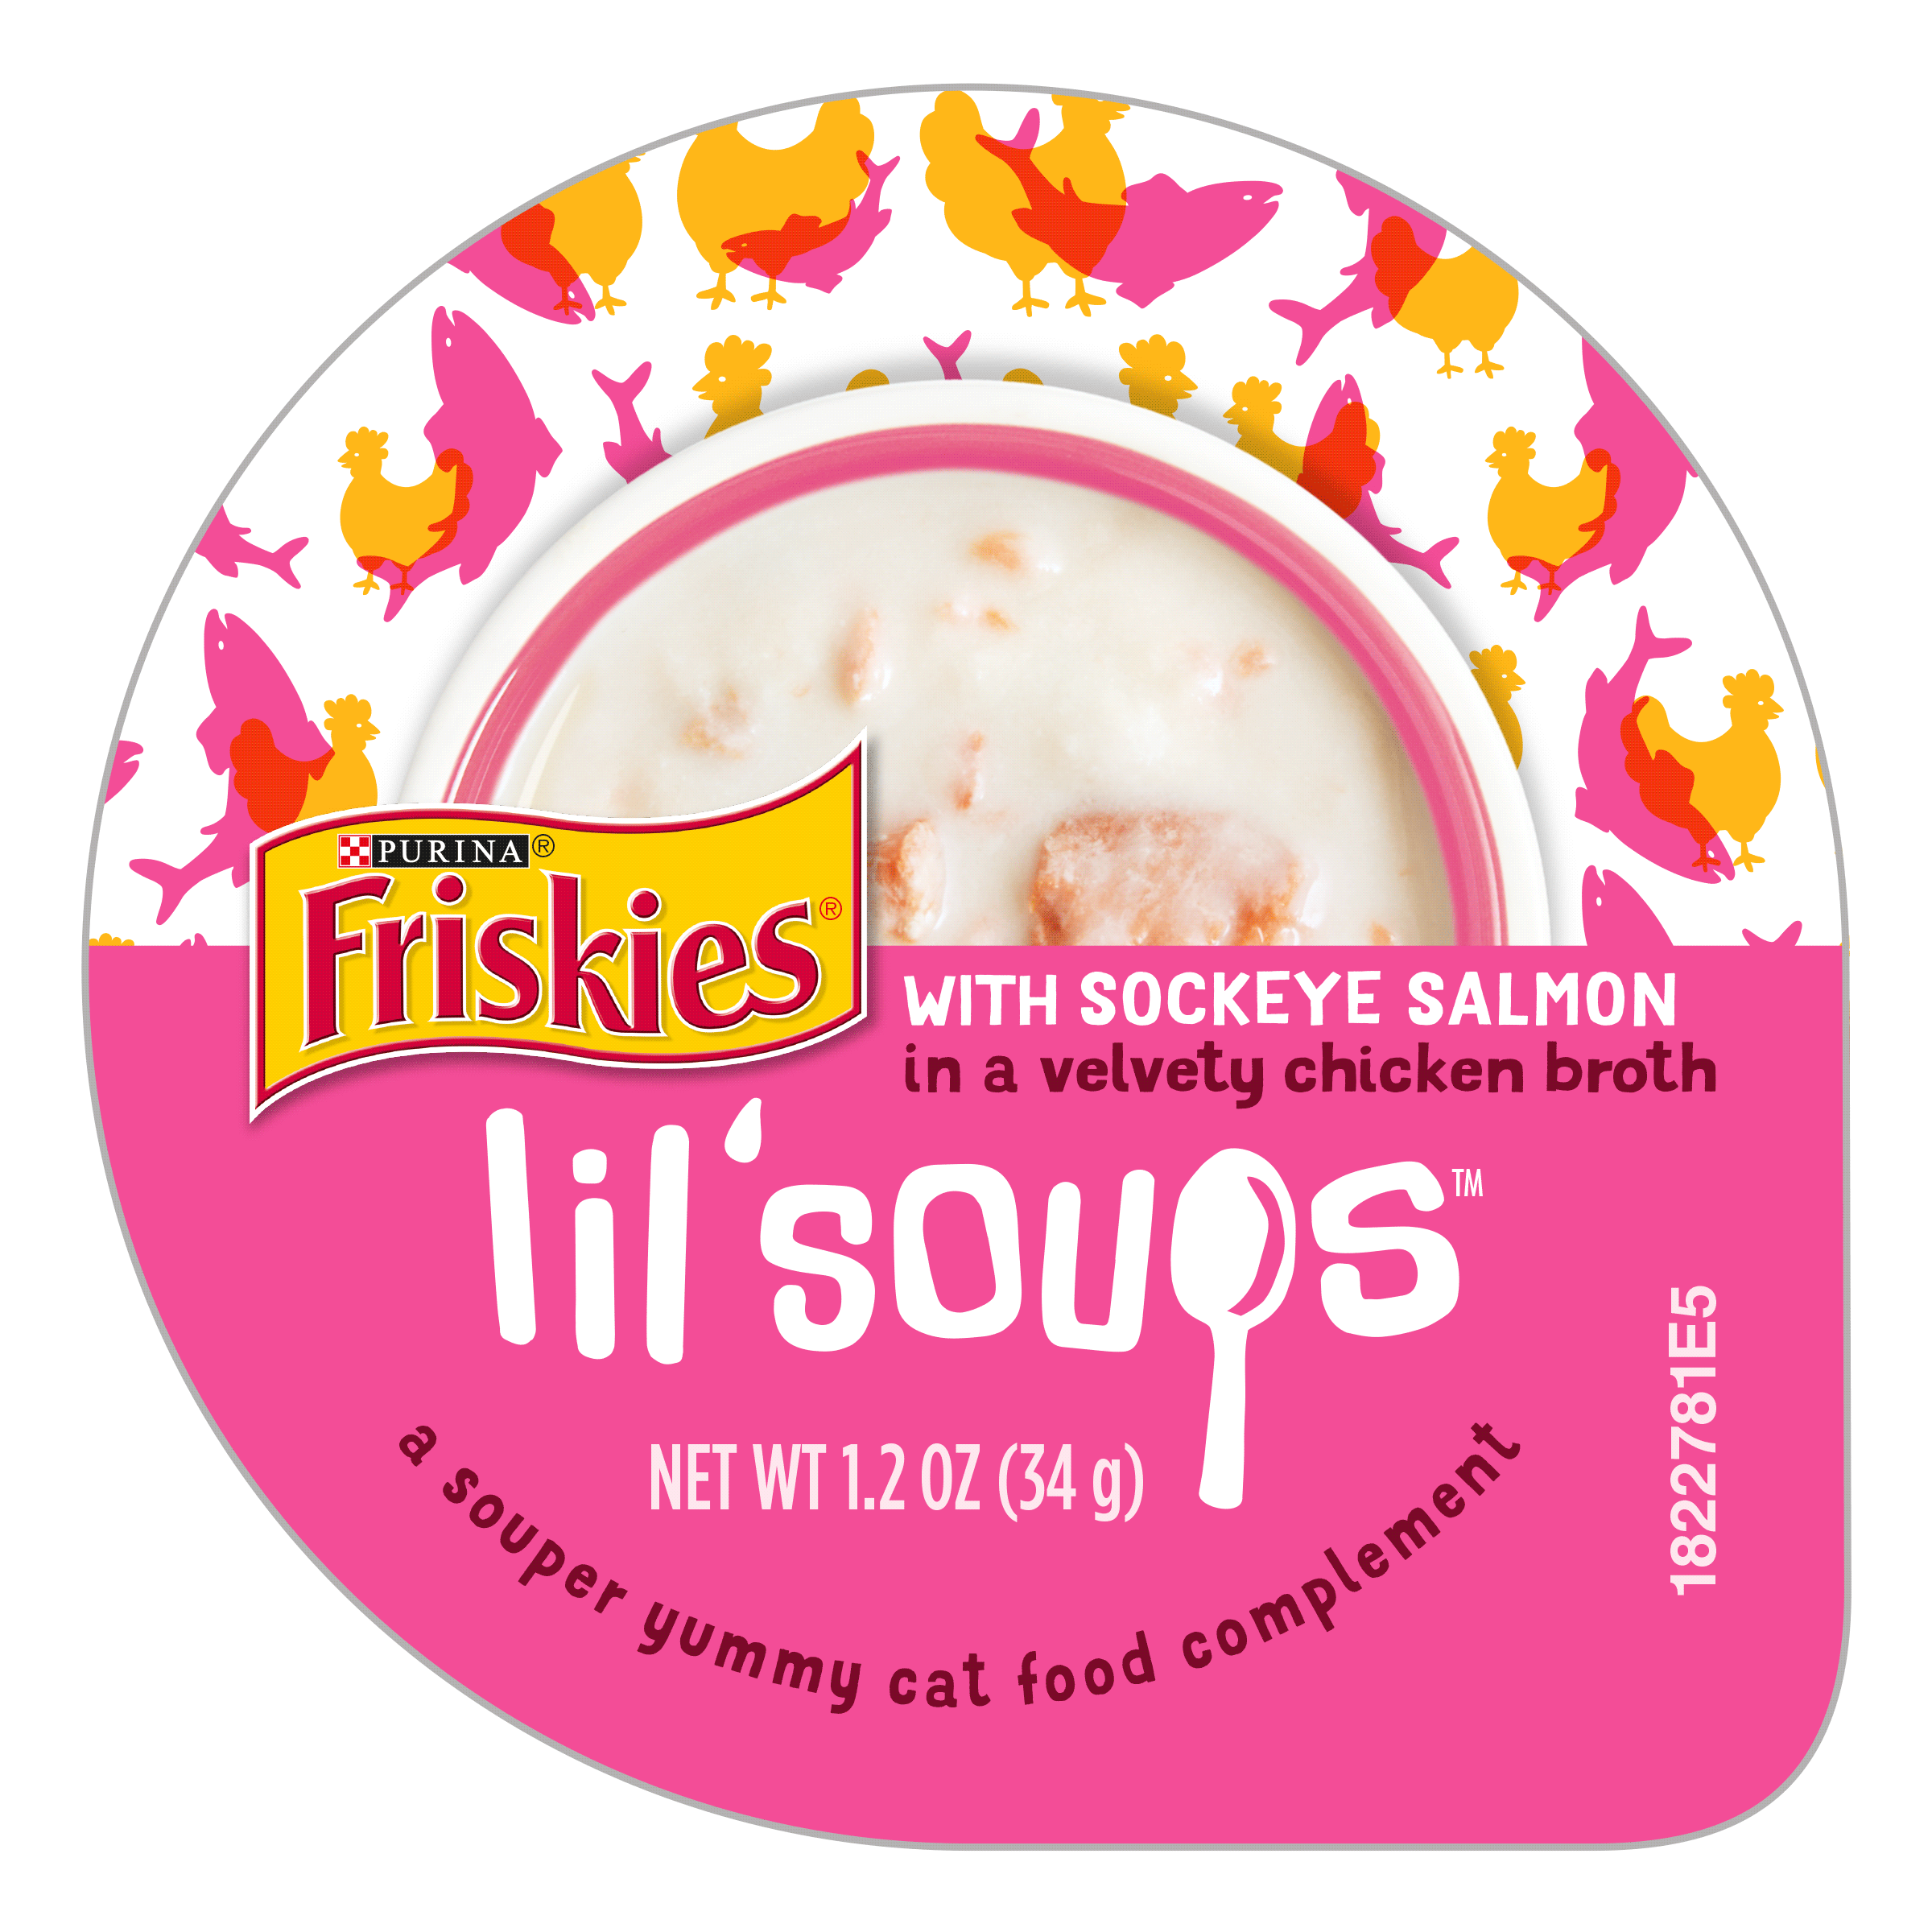 6 Individual containers of Purina Friskies Lil Soups with Sockeye Salmon in a Velvety Chicken Broth Adult Wet Cat Treat/Food Topper. 1.2 oz. ea